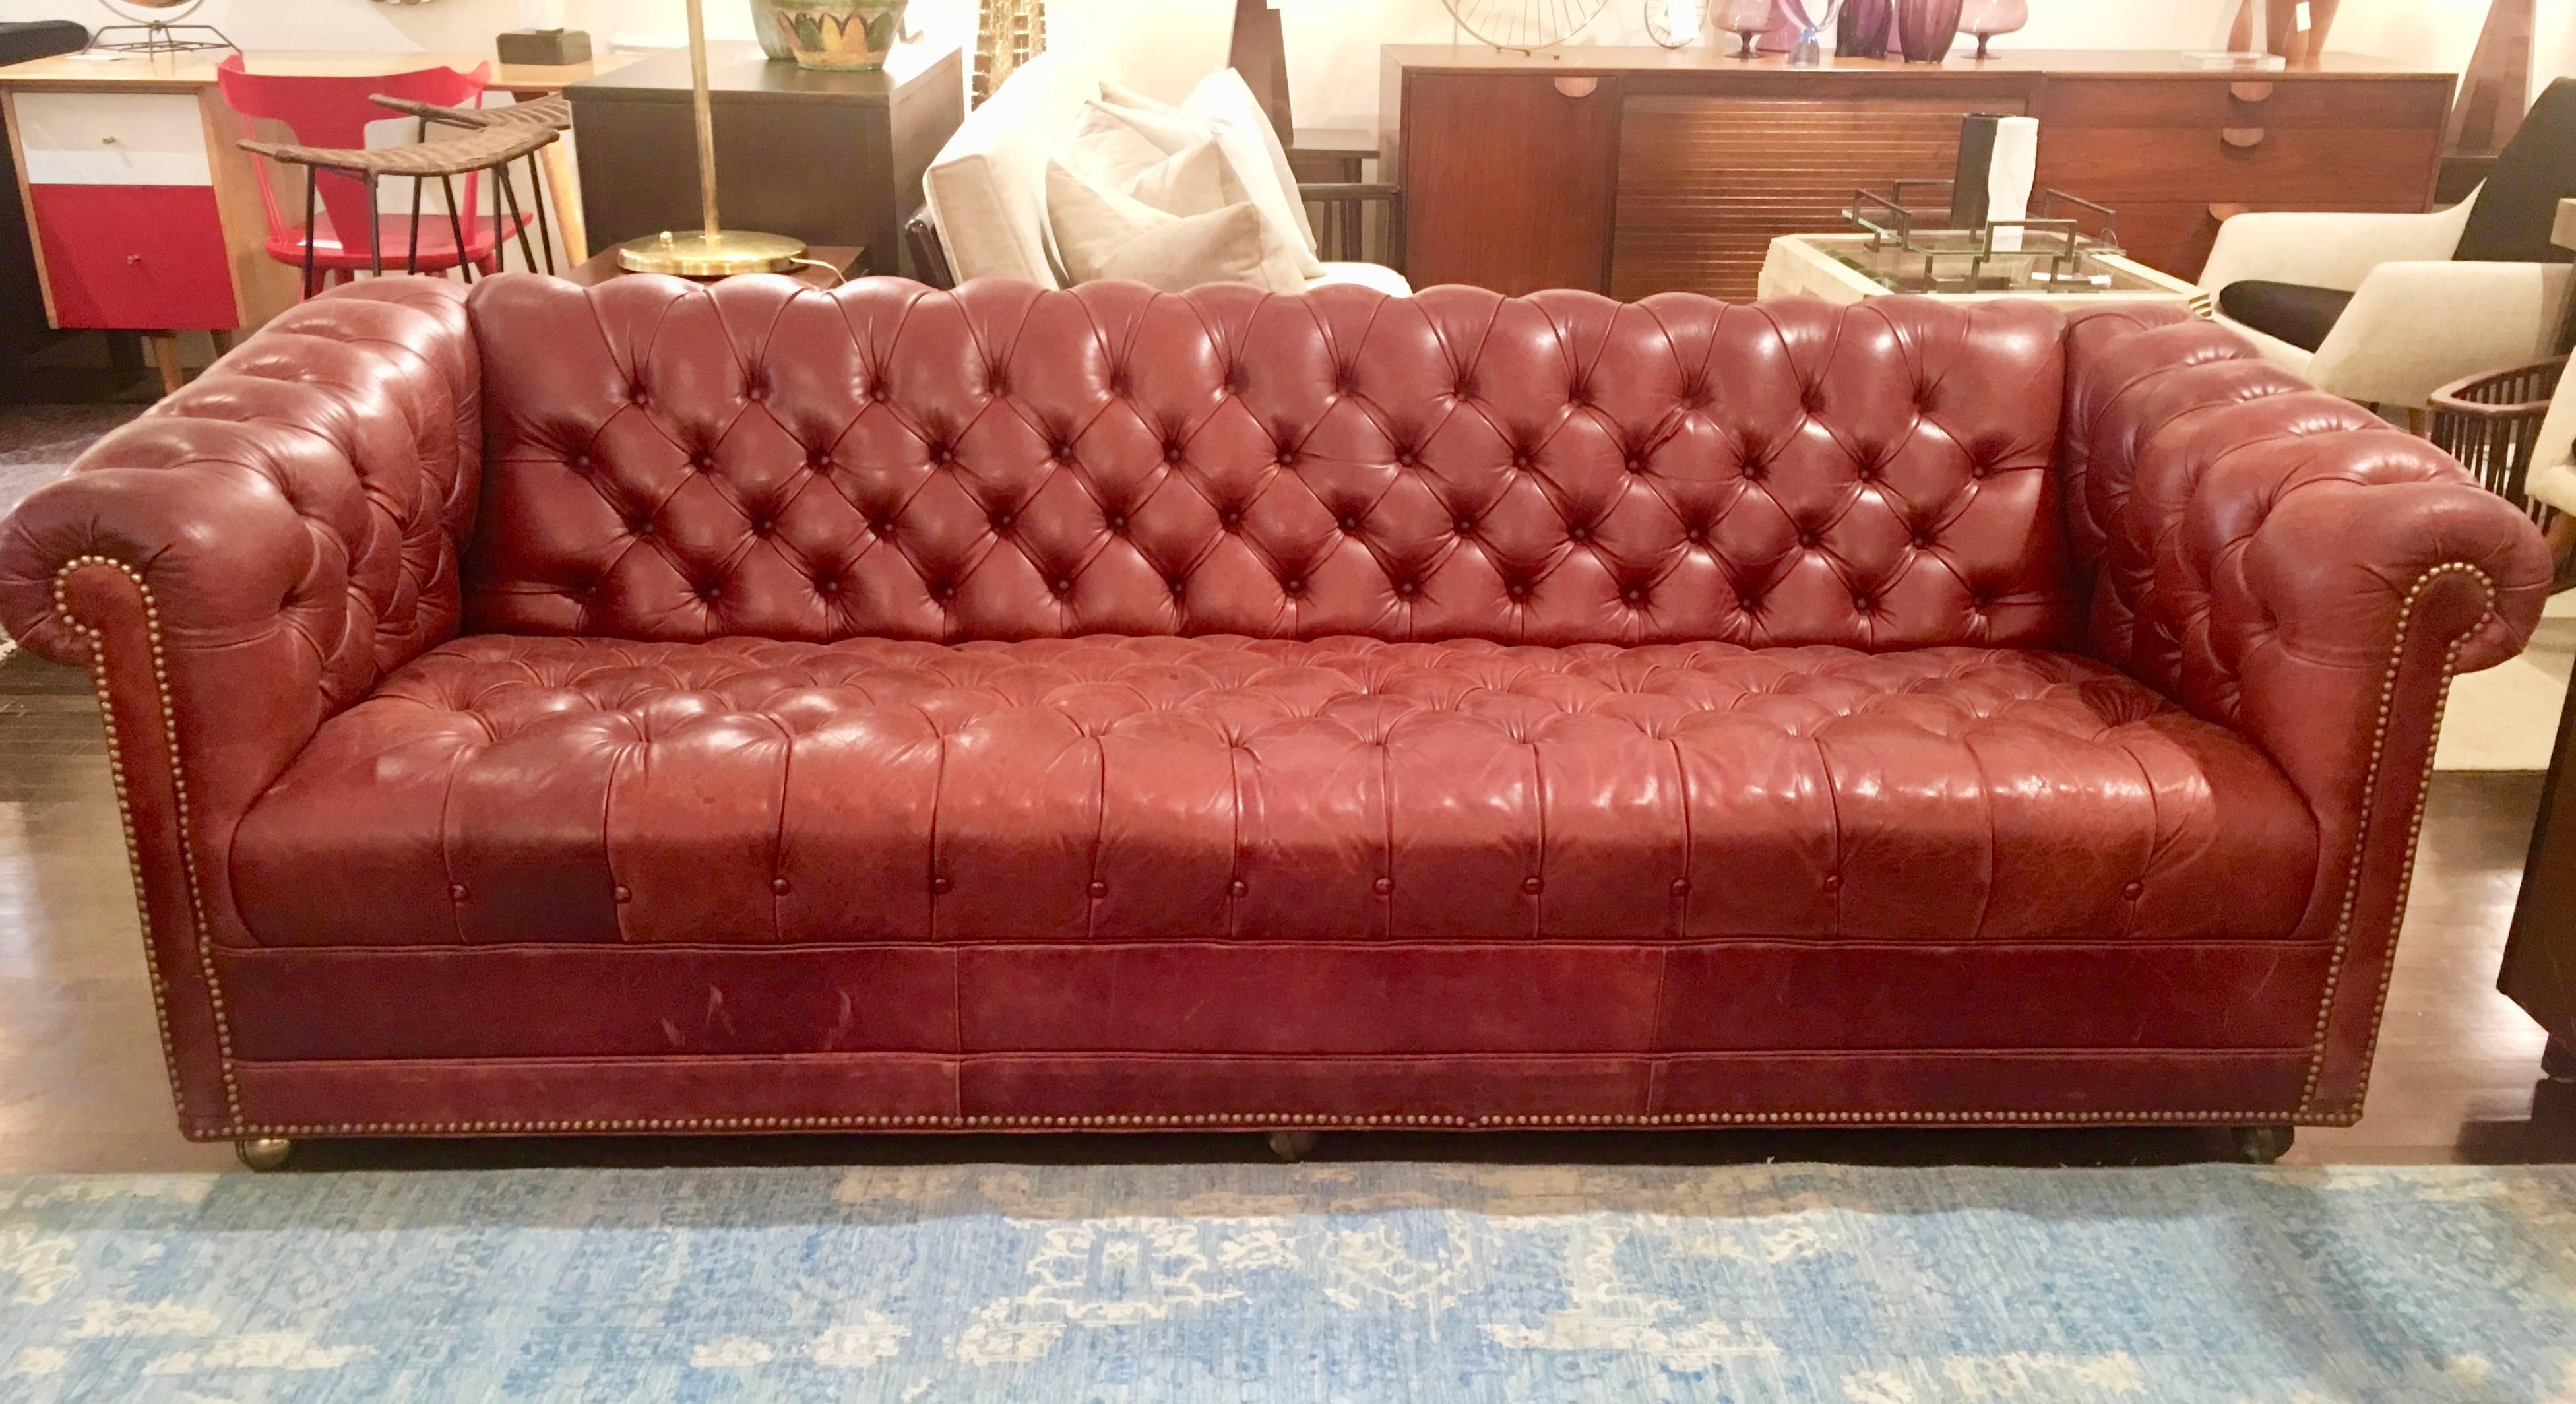 Classic Chesterfield sofa in a perfect dark red leather. This is a well made and substantial vintage piece accented with brass nail heads. The leather has some desirable wear and patina. Please contact for location.